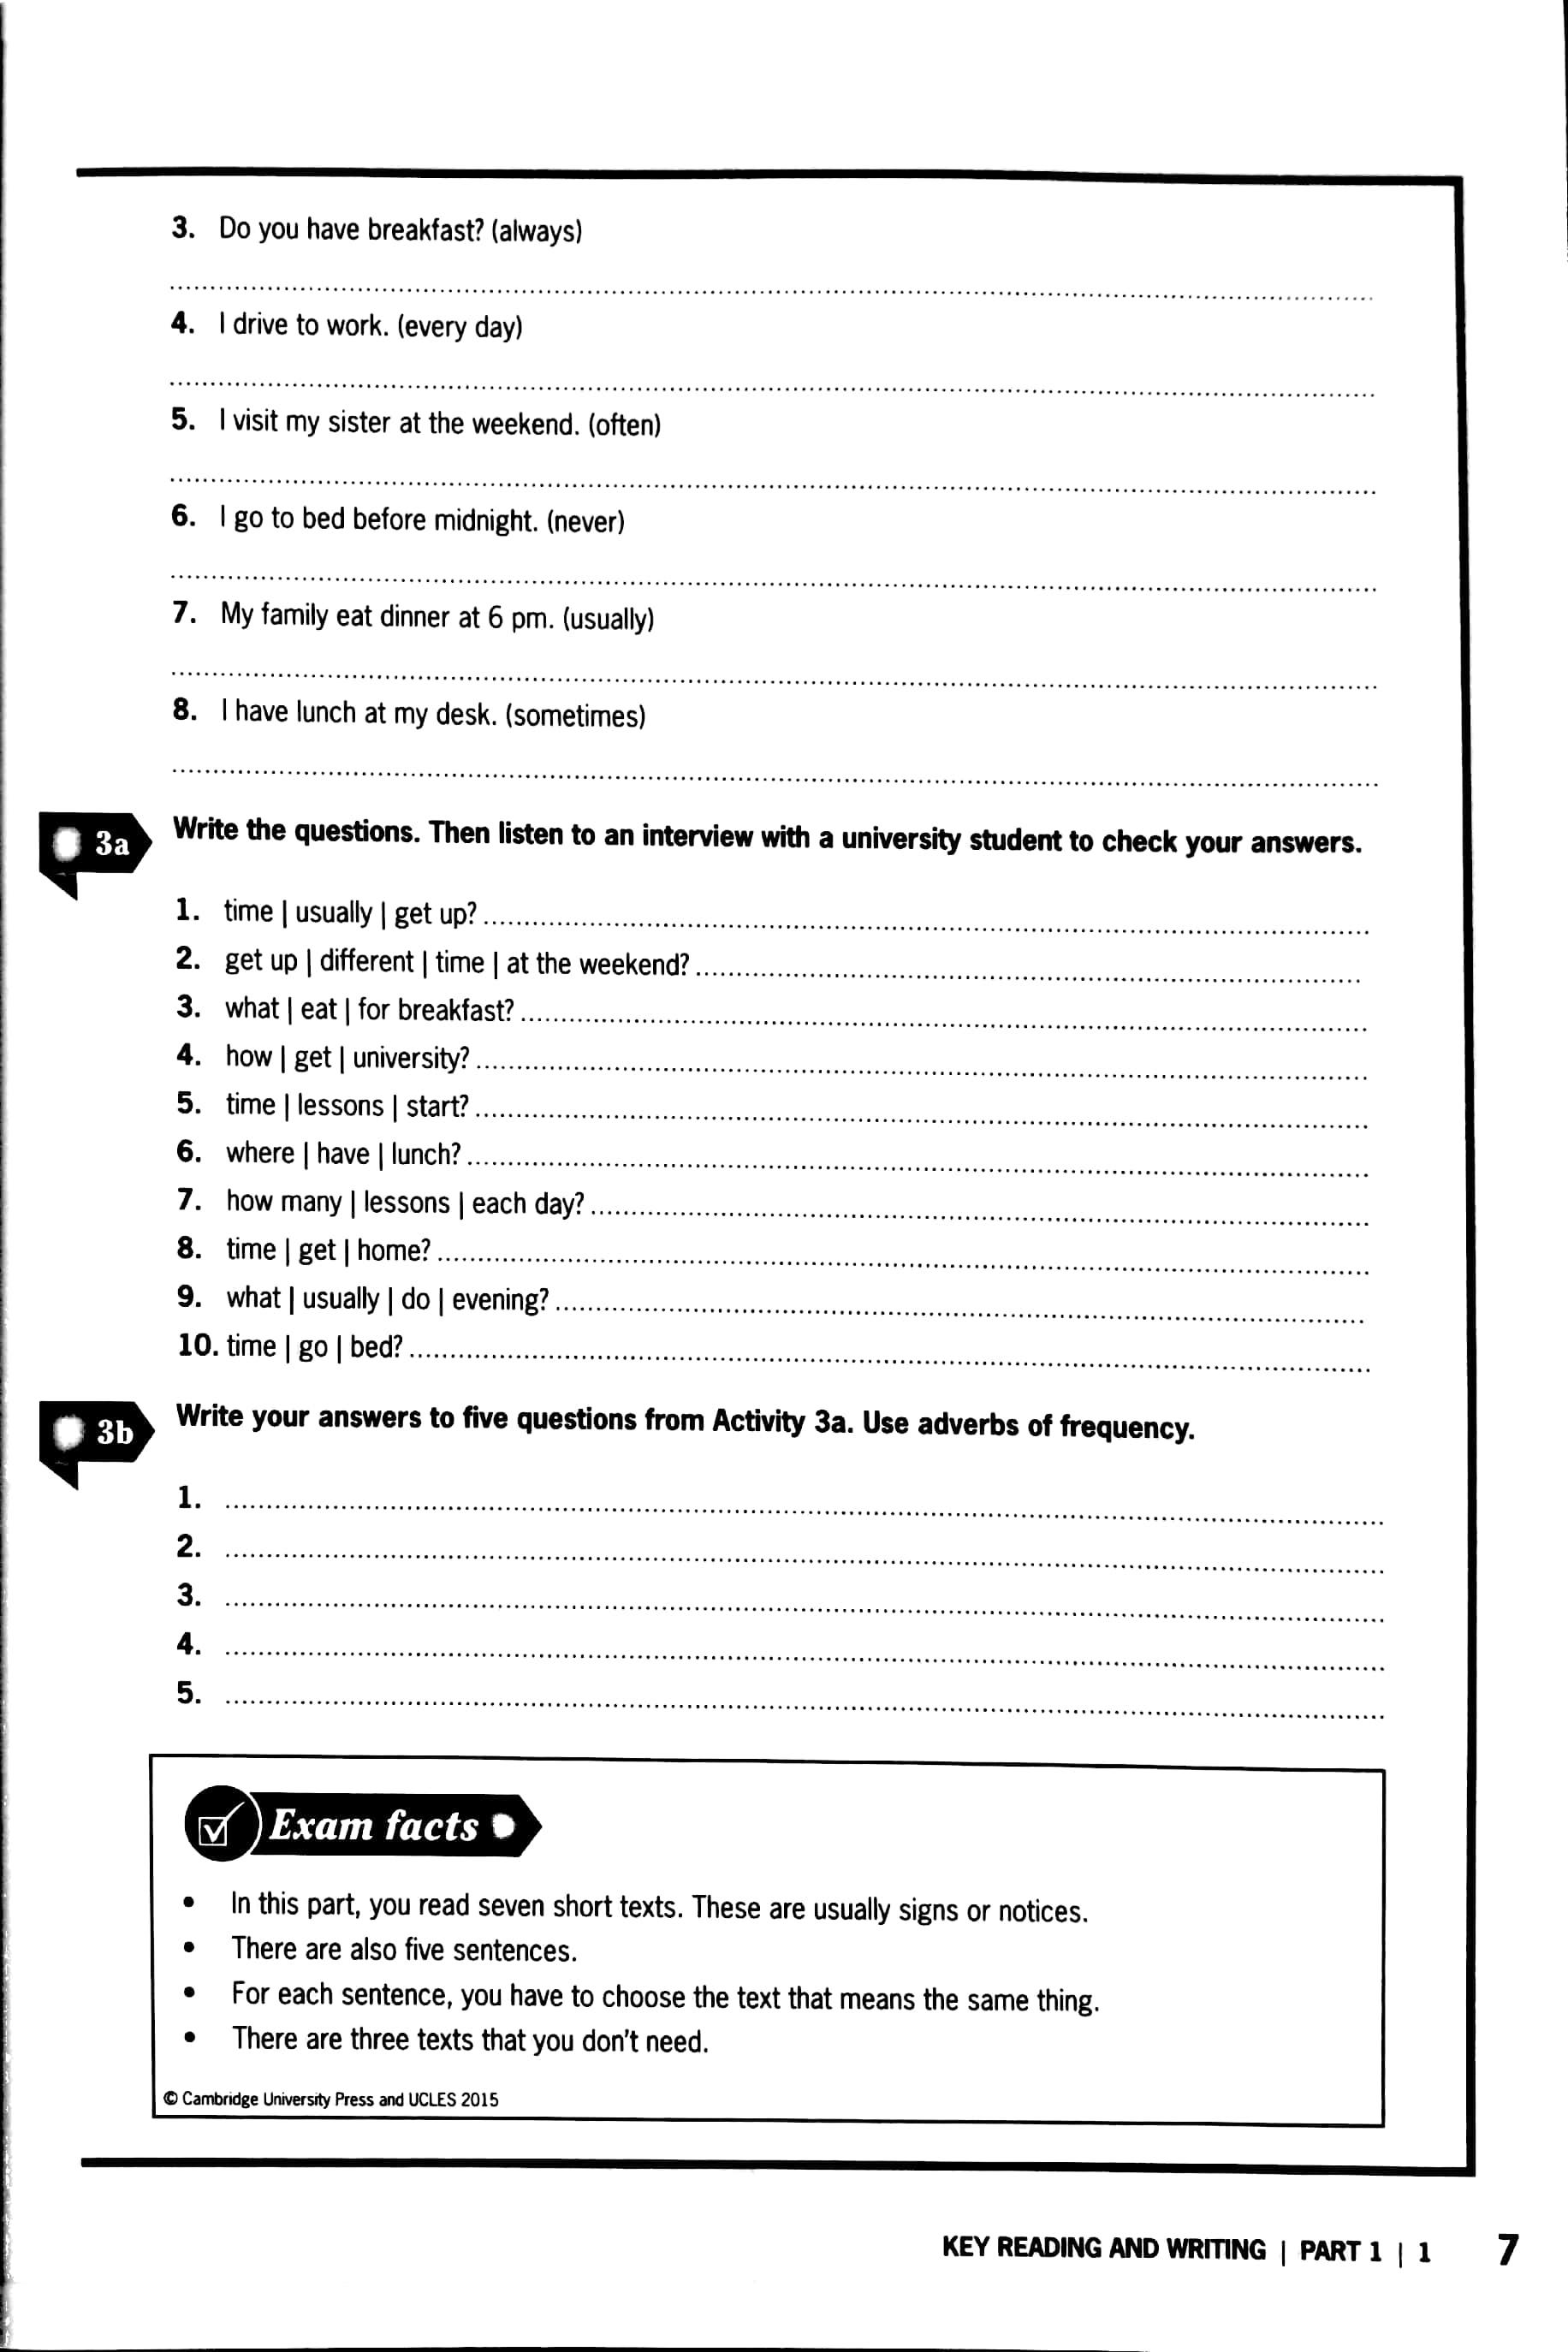 Cam English Exam Booster for Key and Key for Schools SB w/o Ans w Audio